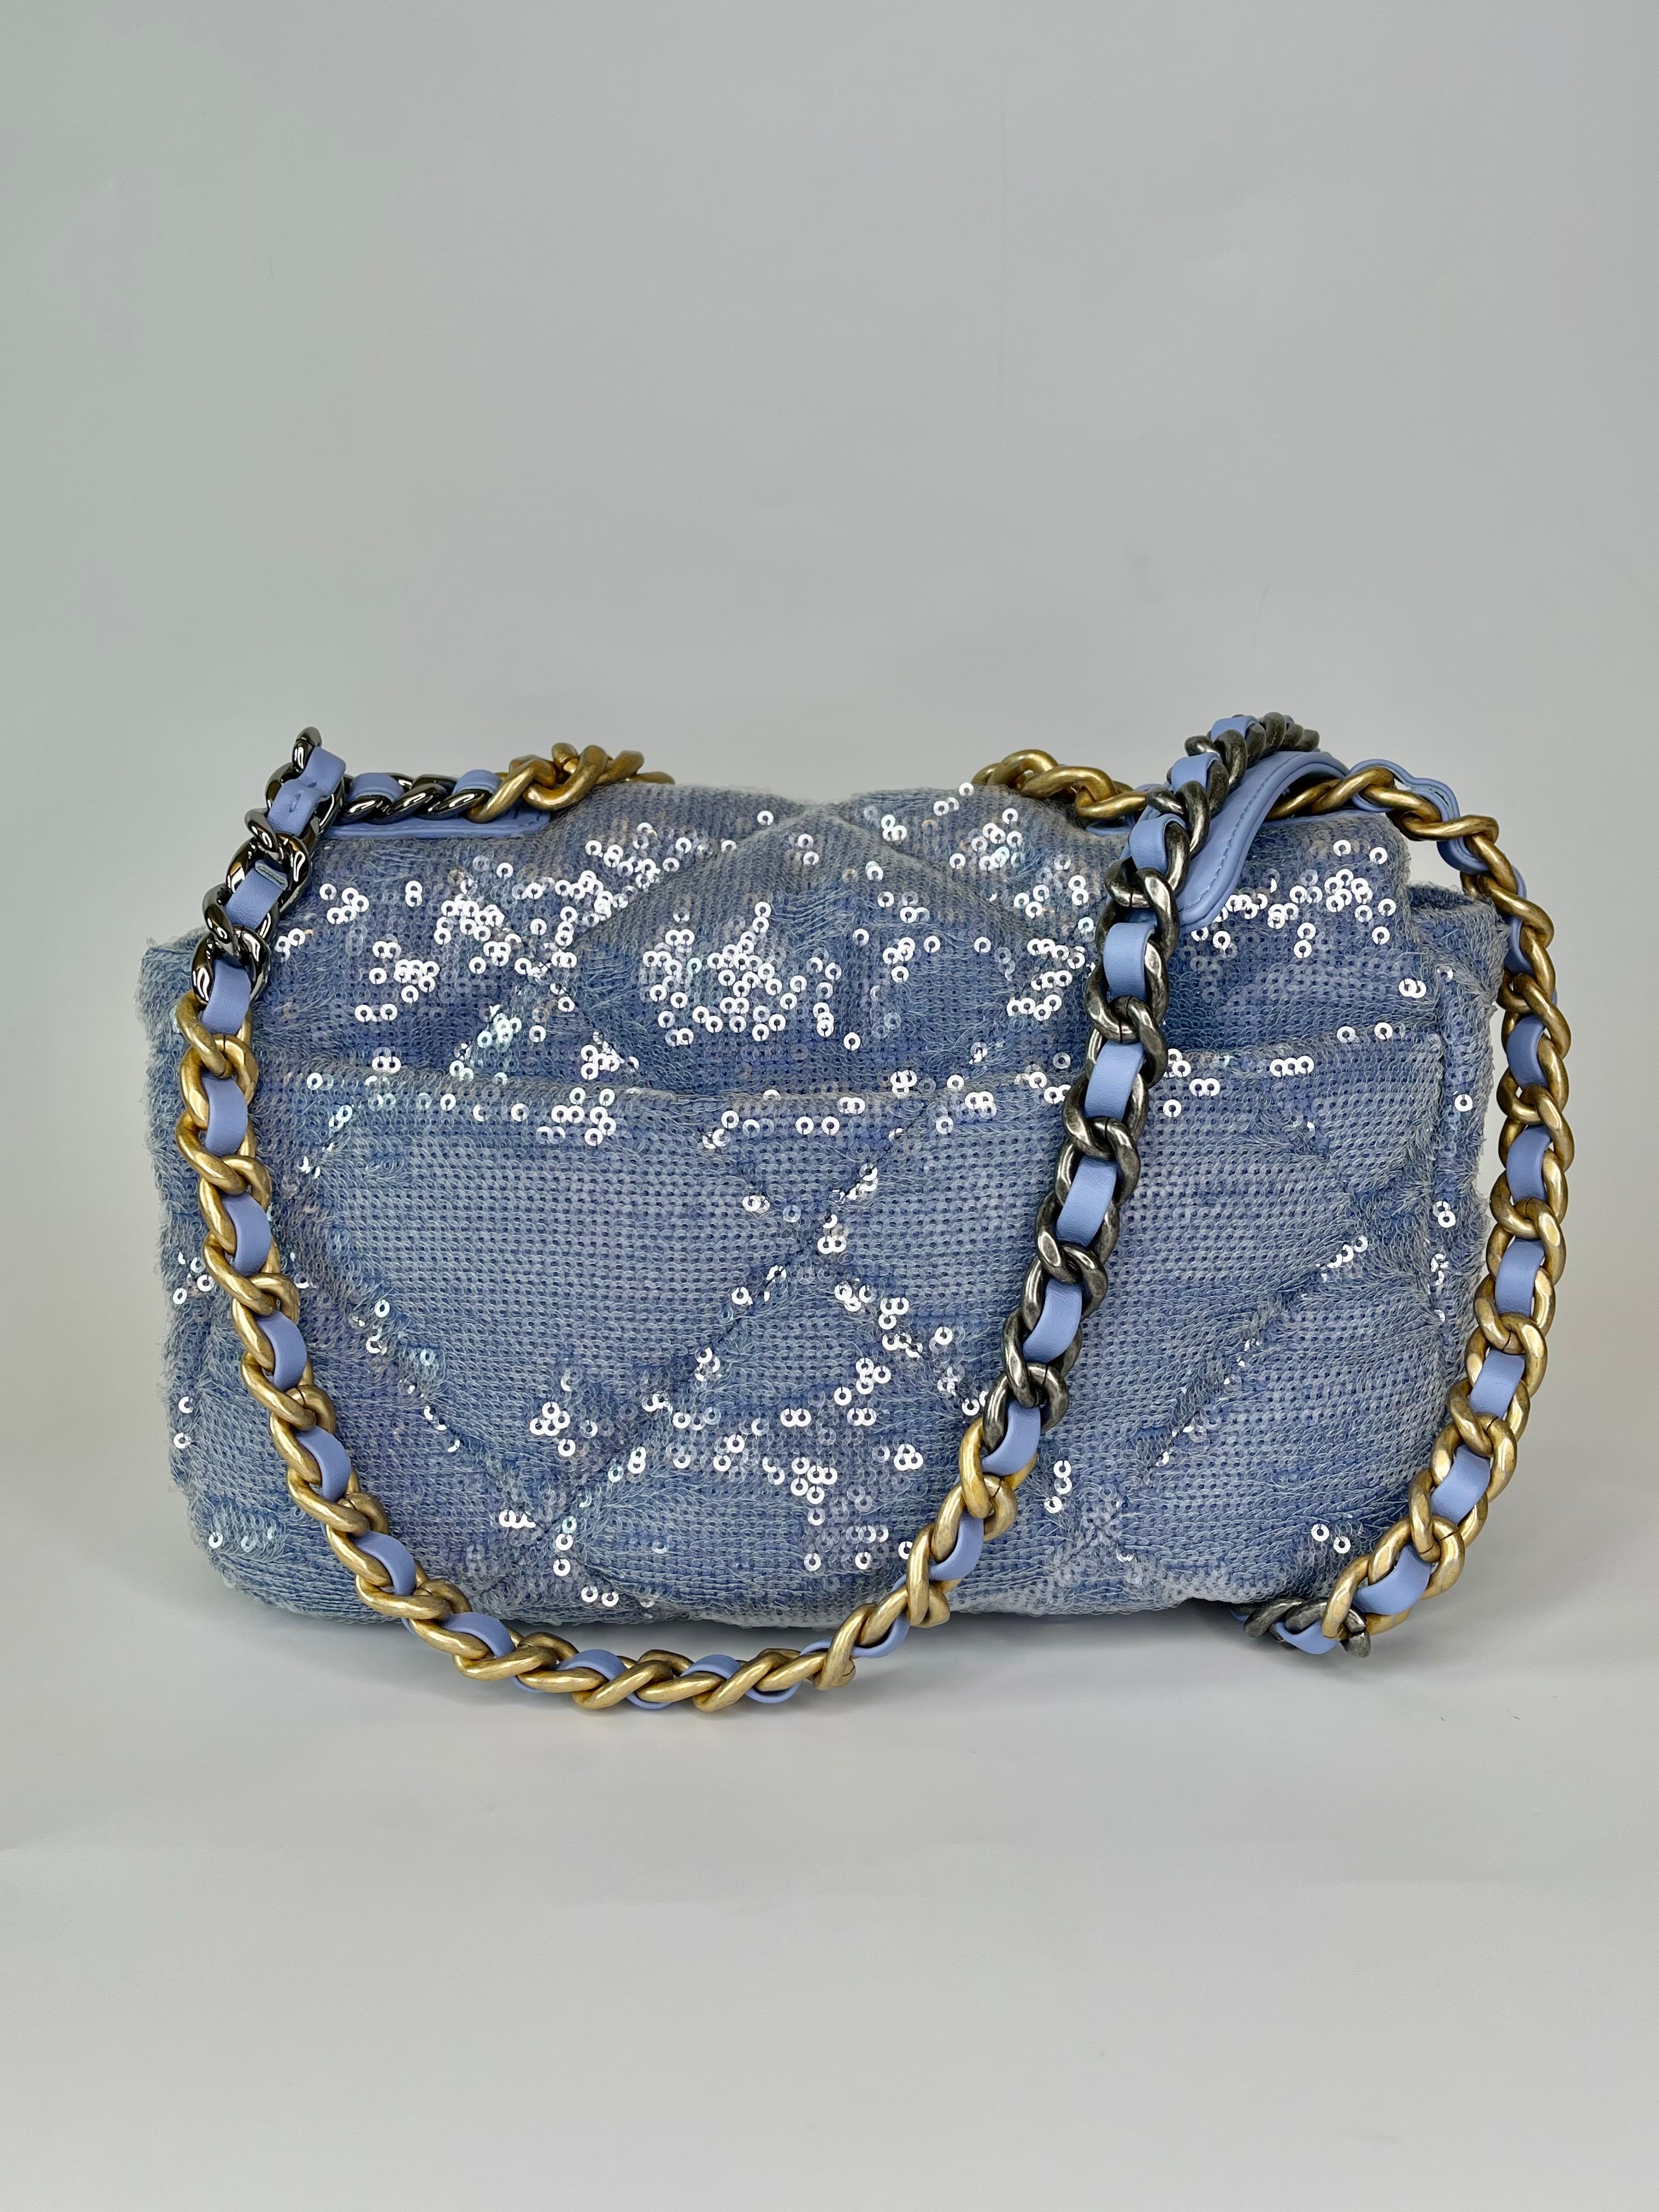 This shoulder bag is made of light blue circular sequins on a base of light blue fabric. The bag features blue leather threaded silver, ruthenium, and an aged gold chain link shoulder straps with a leather threaded aged gold Chanel 19 CC turn lock